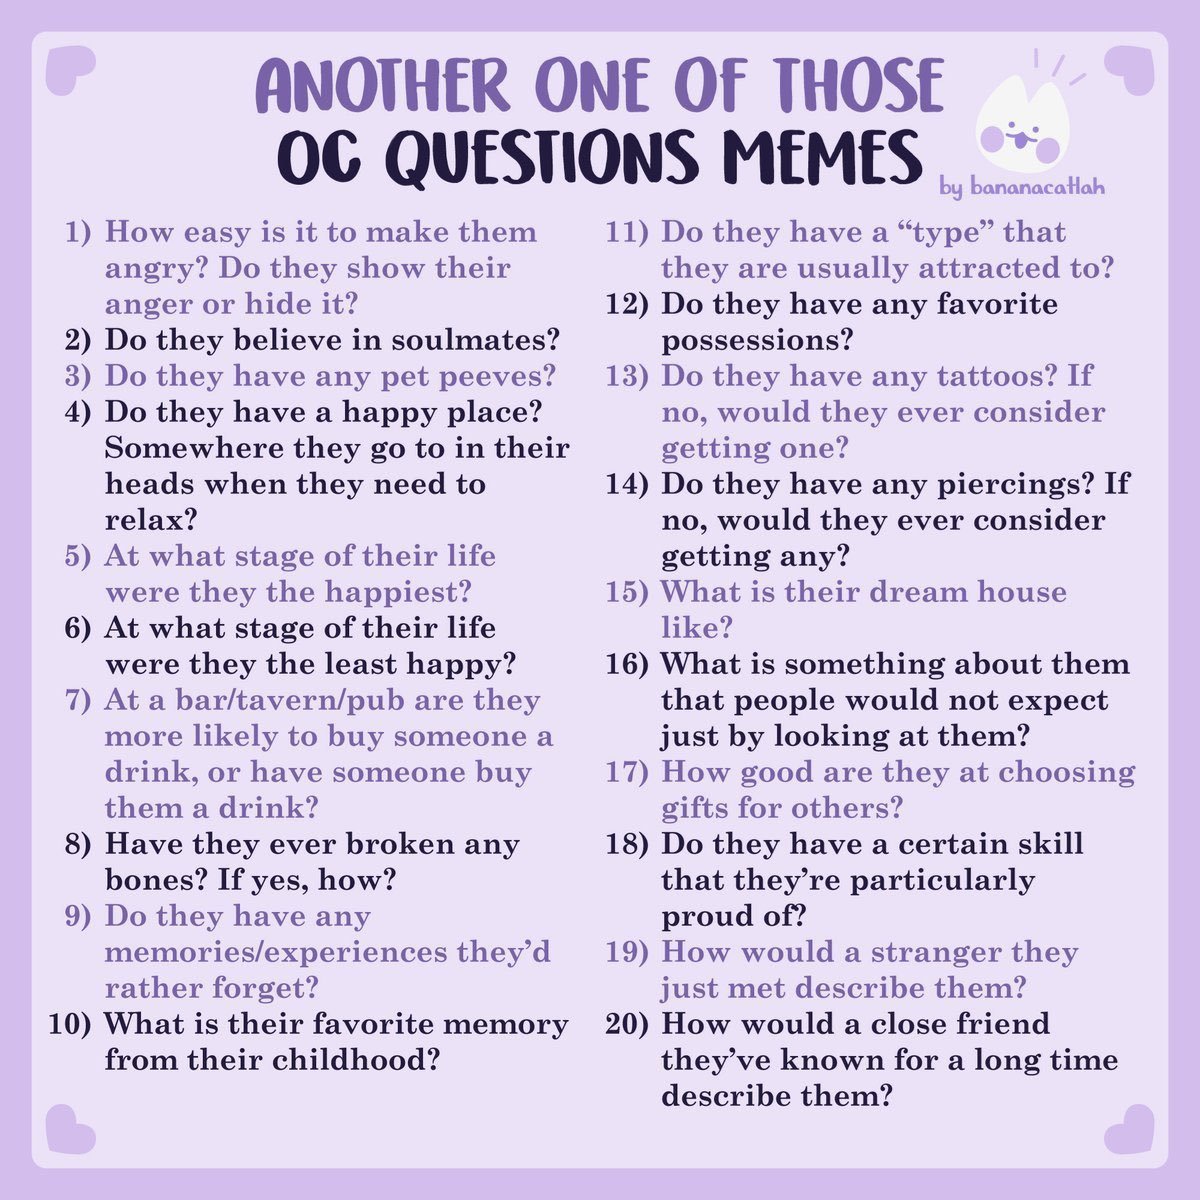 Okay, ask away and I'll eventually answer. https://t.co/8SquMHHqds